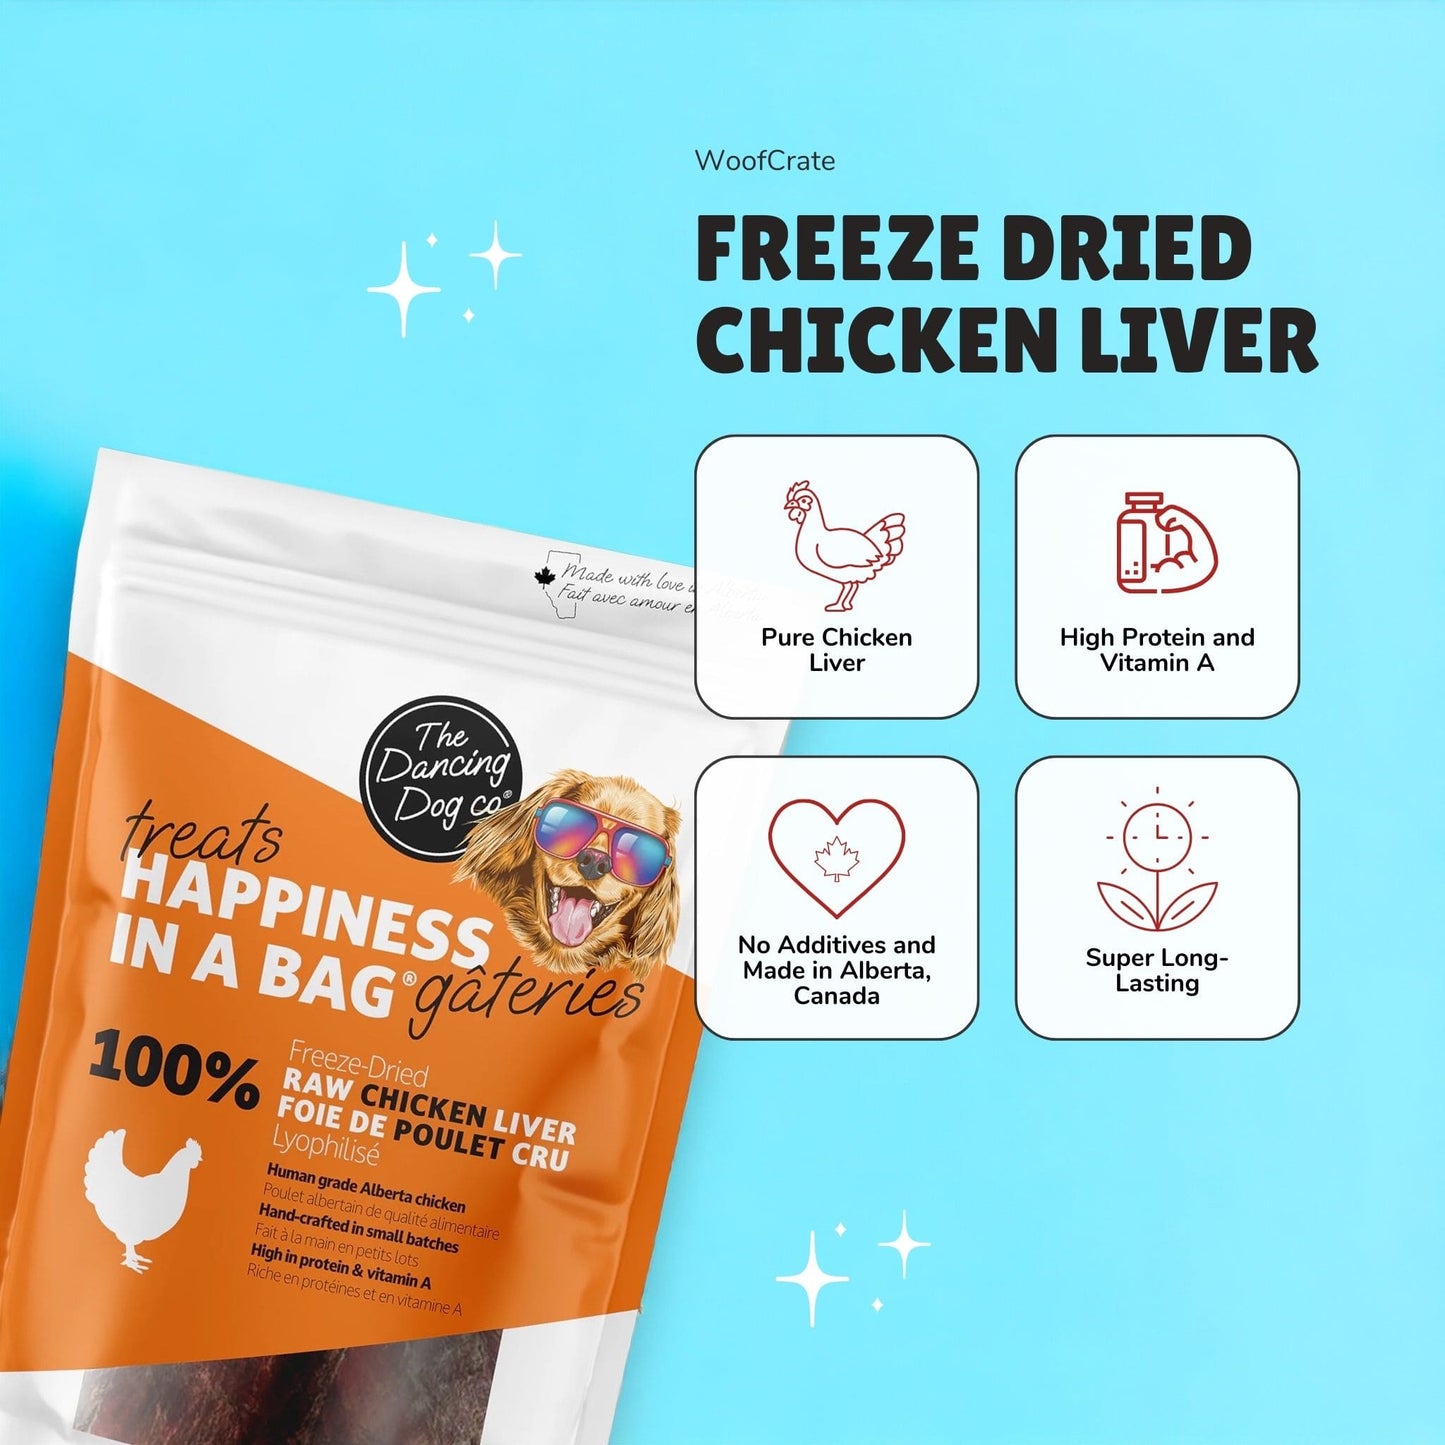 Benefits of freeze dried chicken liver treats for dogs side by side with a bag of chicken liver dog treats. The benefits include being high in omega and protein, having no additives, being made in Canada, and are long lasting.